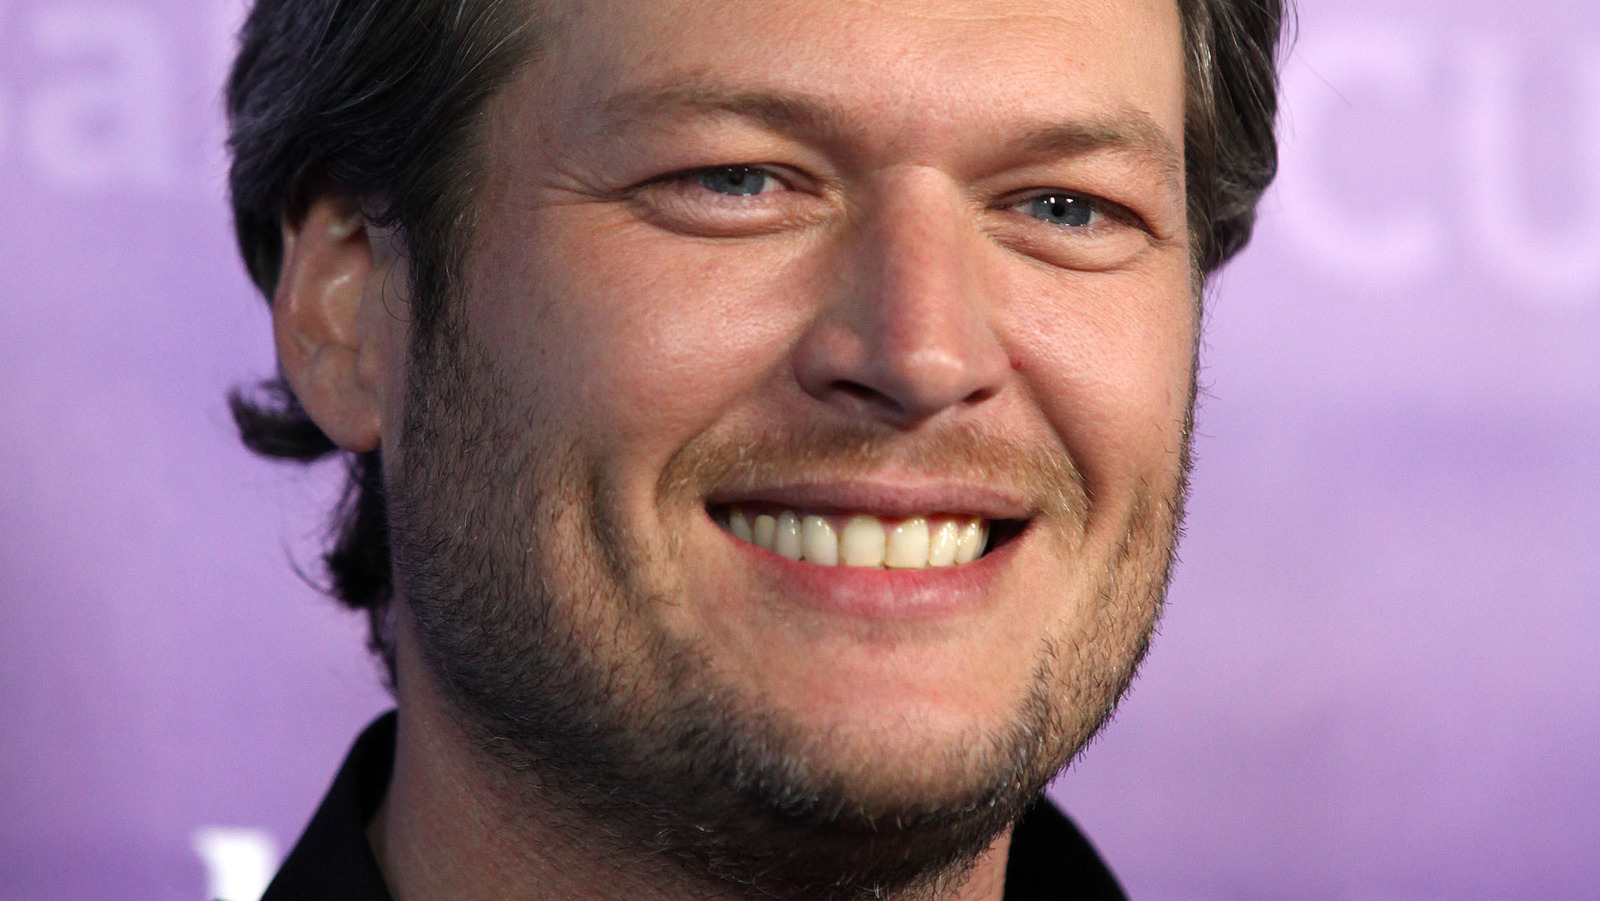 How Blake Shelton Just Referred To Himself Is Melting Hearts